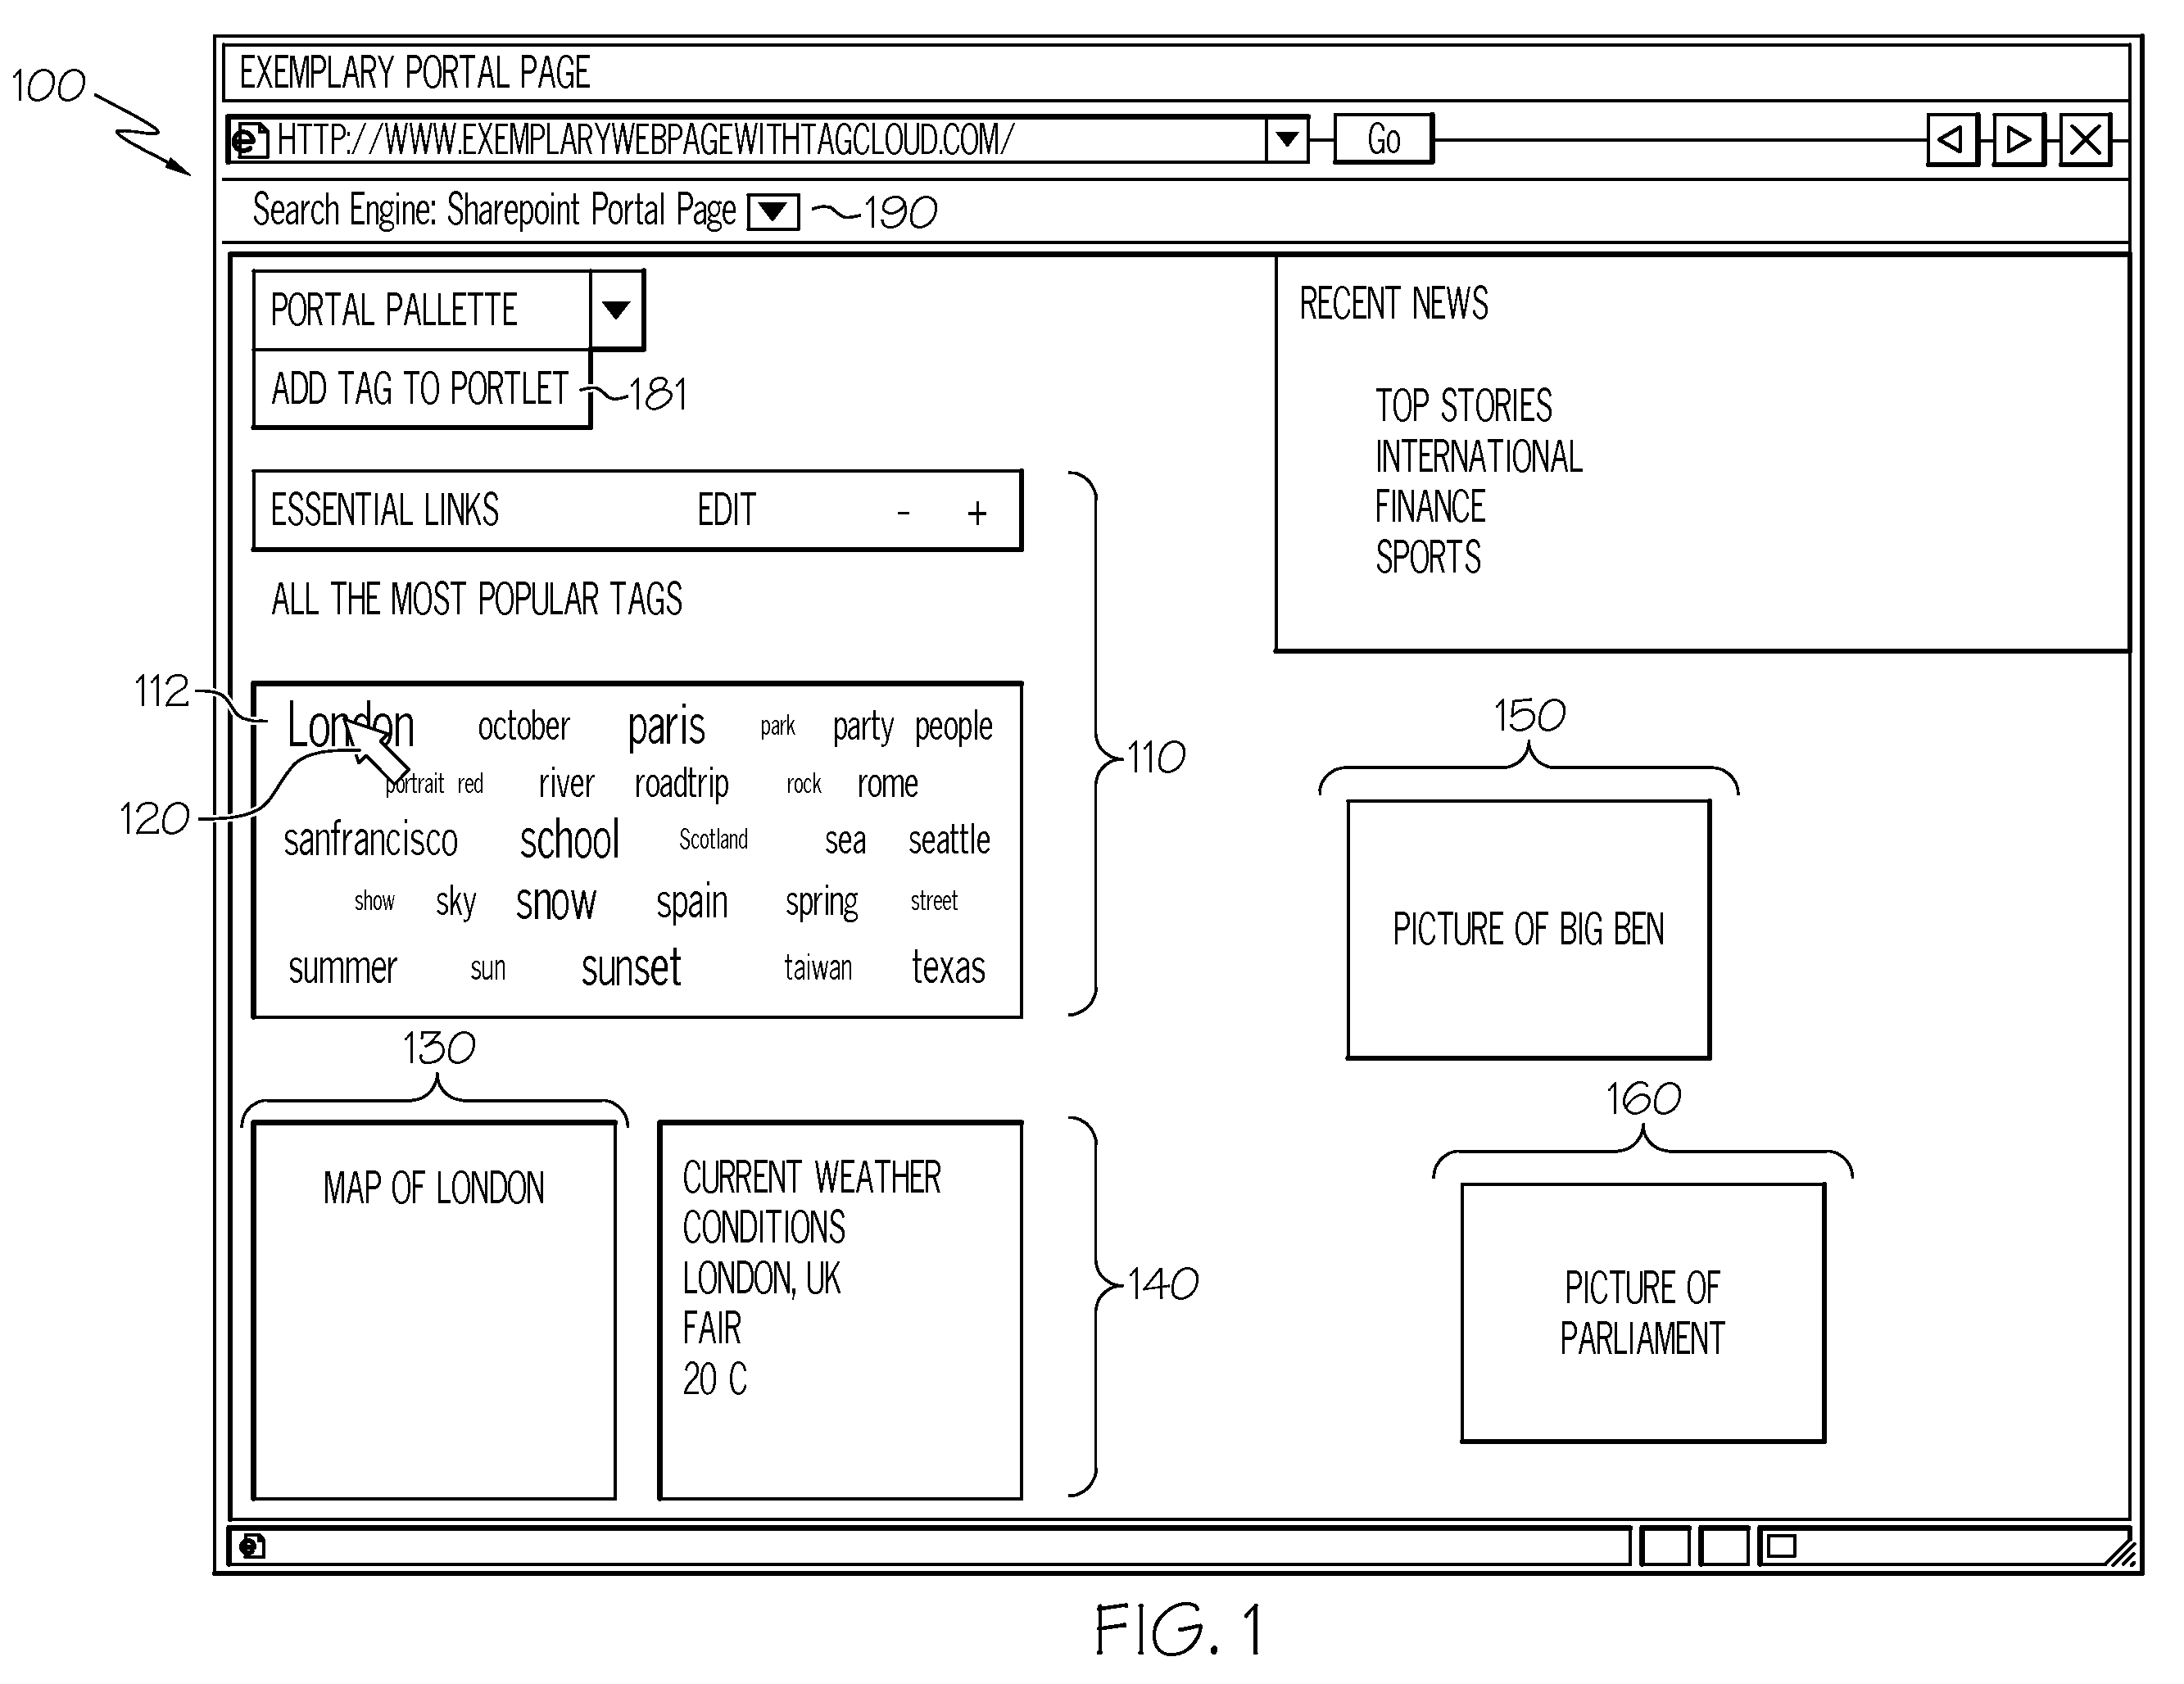 Method and Apparatus for Deploying Portlets in Portal Pages Based on Social Networking